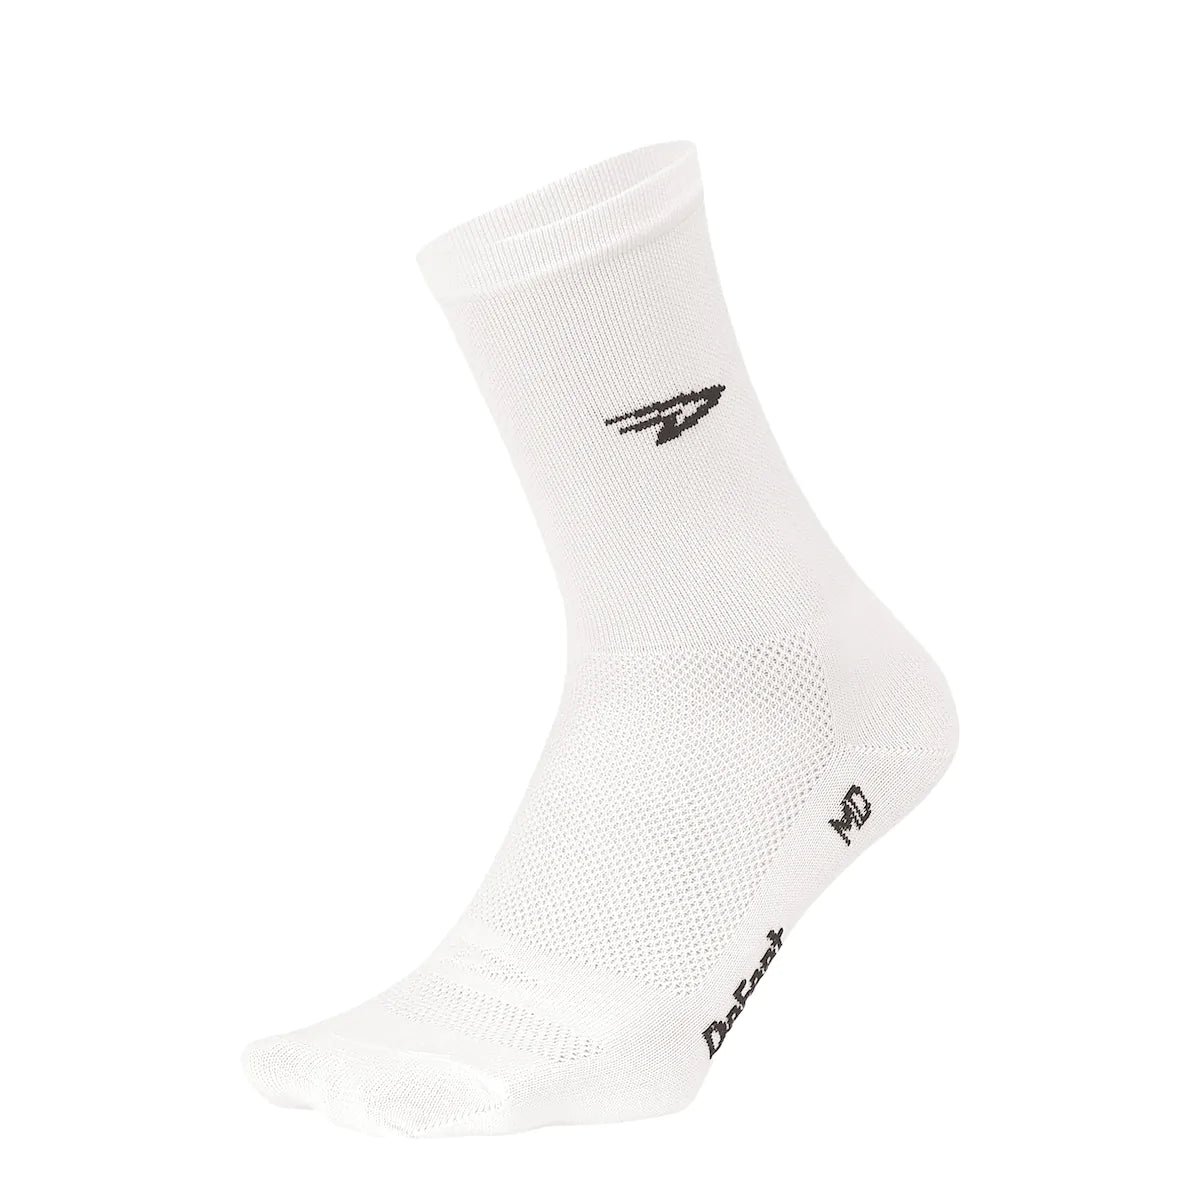 White DeFeet Aireator cycling sock with a 5" cuff and a black d-logo on the cuff